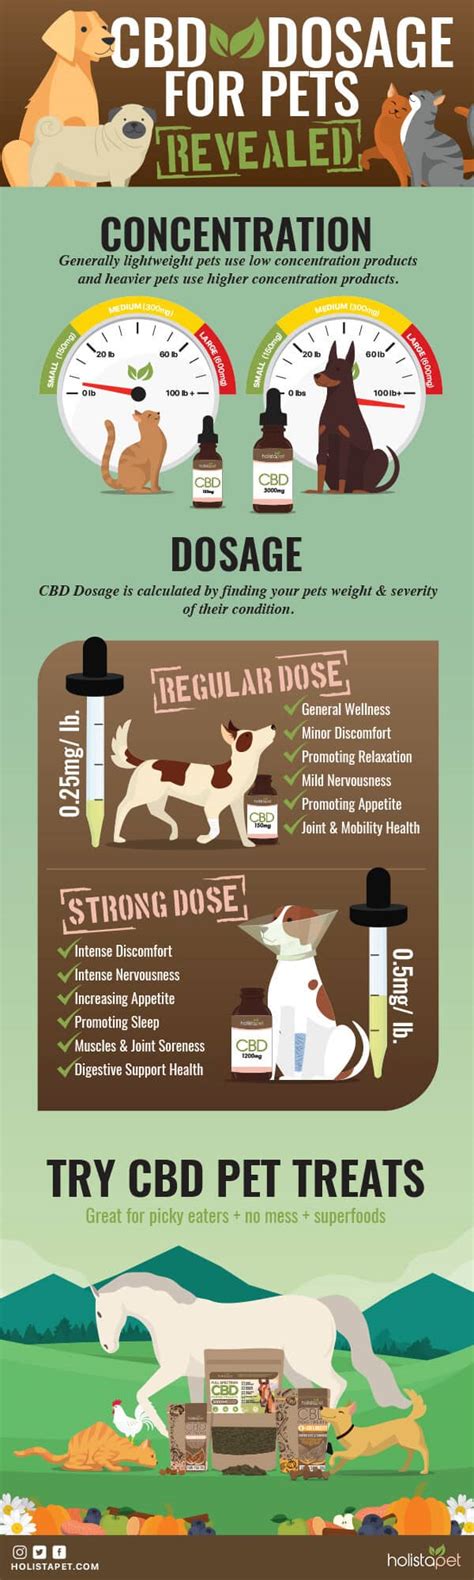  Due to these differences, finding the right dosage and frequency of CBD for your dog